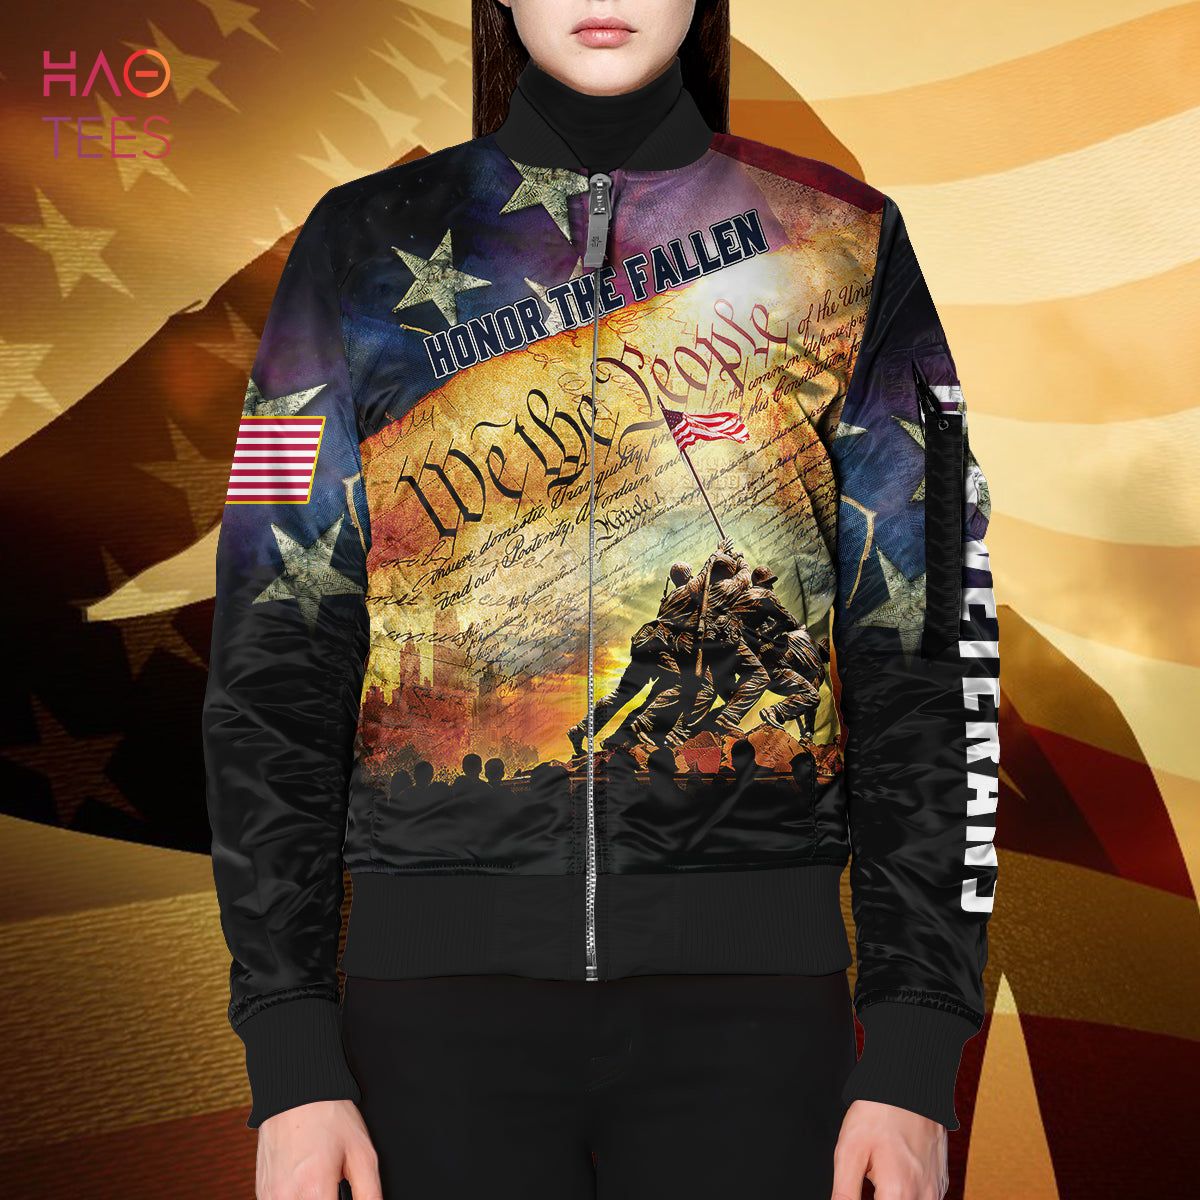 NEW Navy Veteran 3D Bomber, Eagle And Aircraft Carrier, Gift For US Veteran